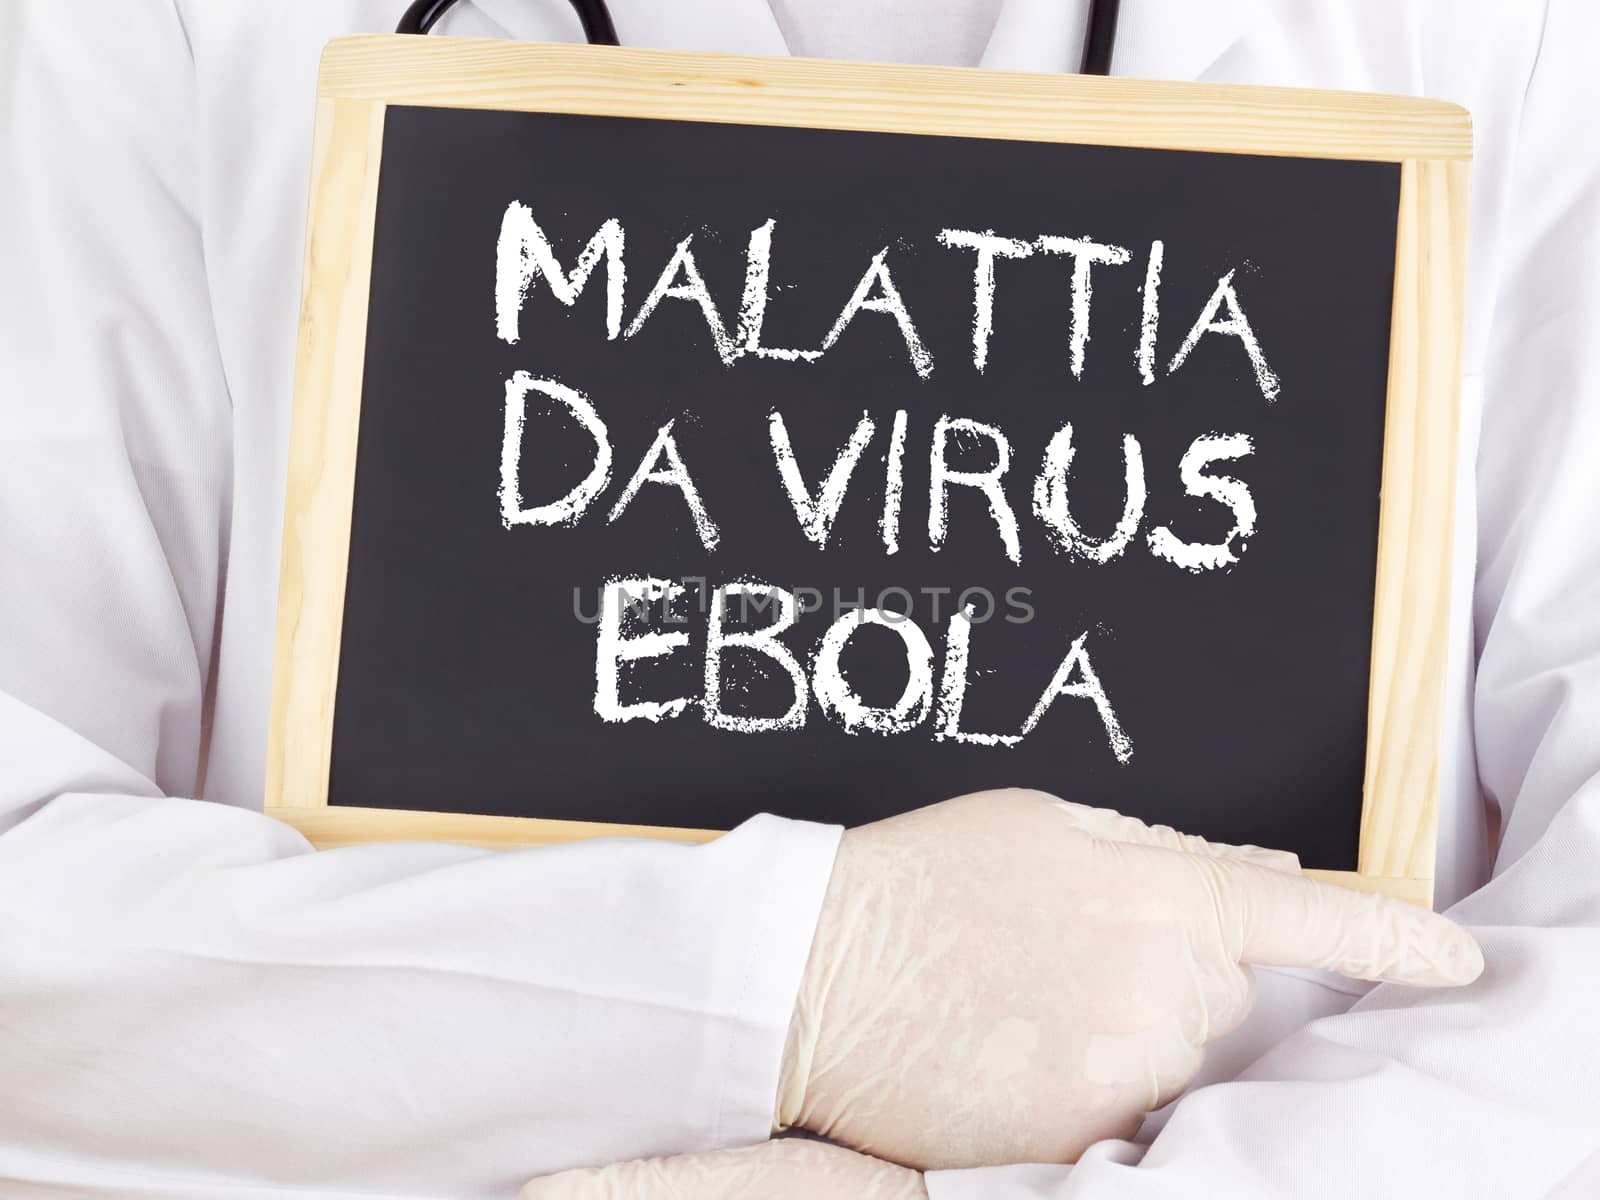 Doctor shows information: Ebola in italian language by gwolters